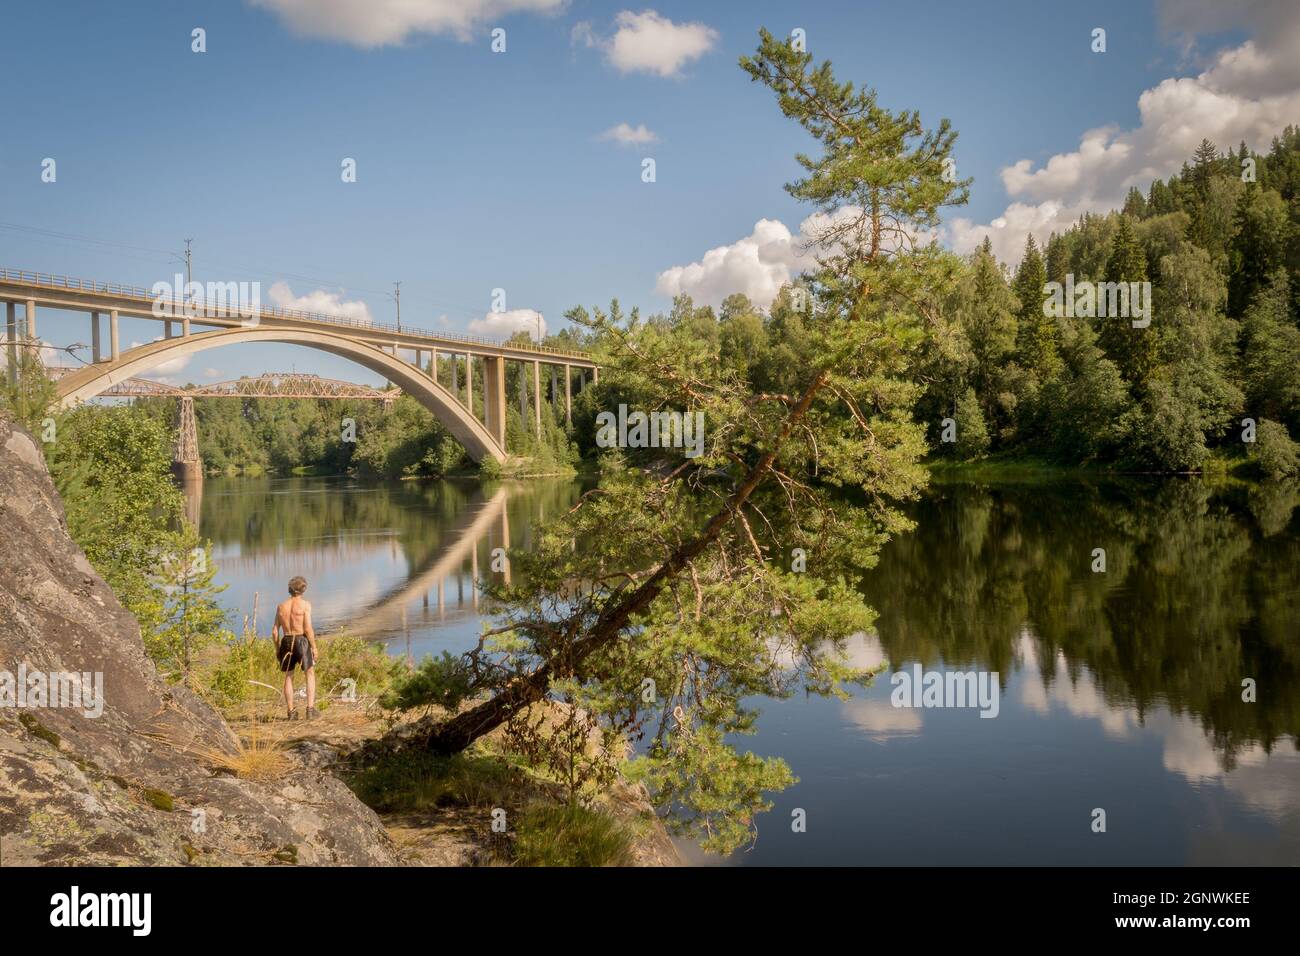 man standing with a river, tree and bridges Stock Photo